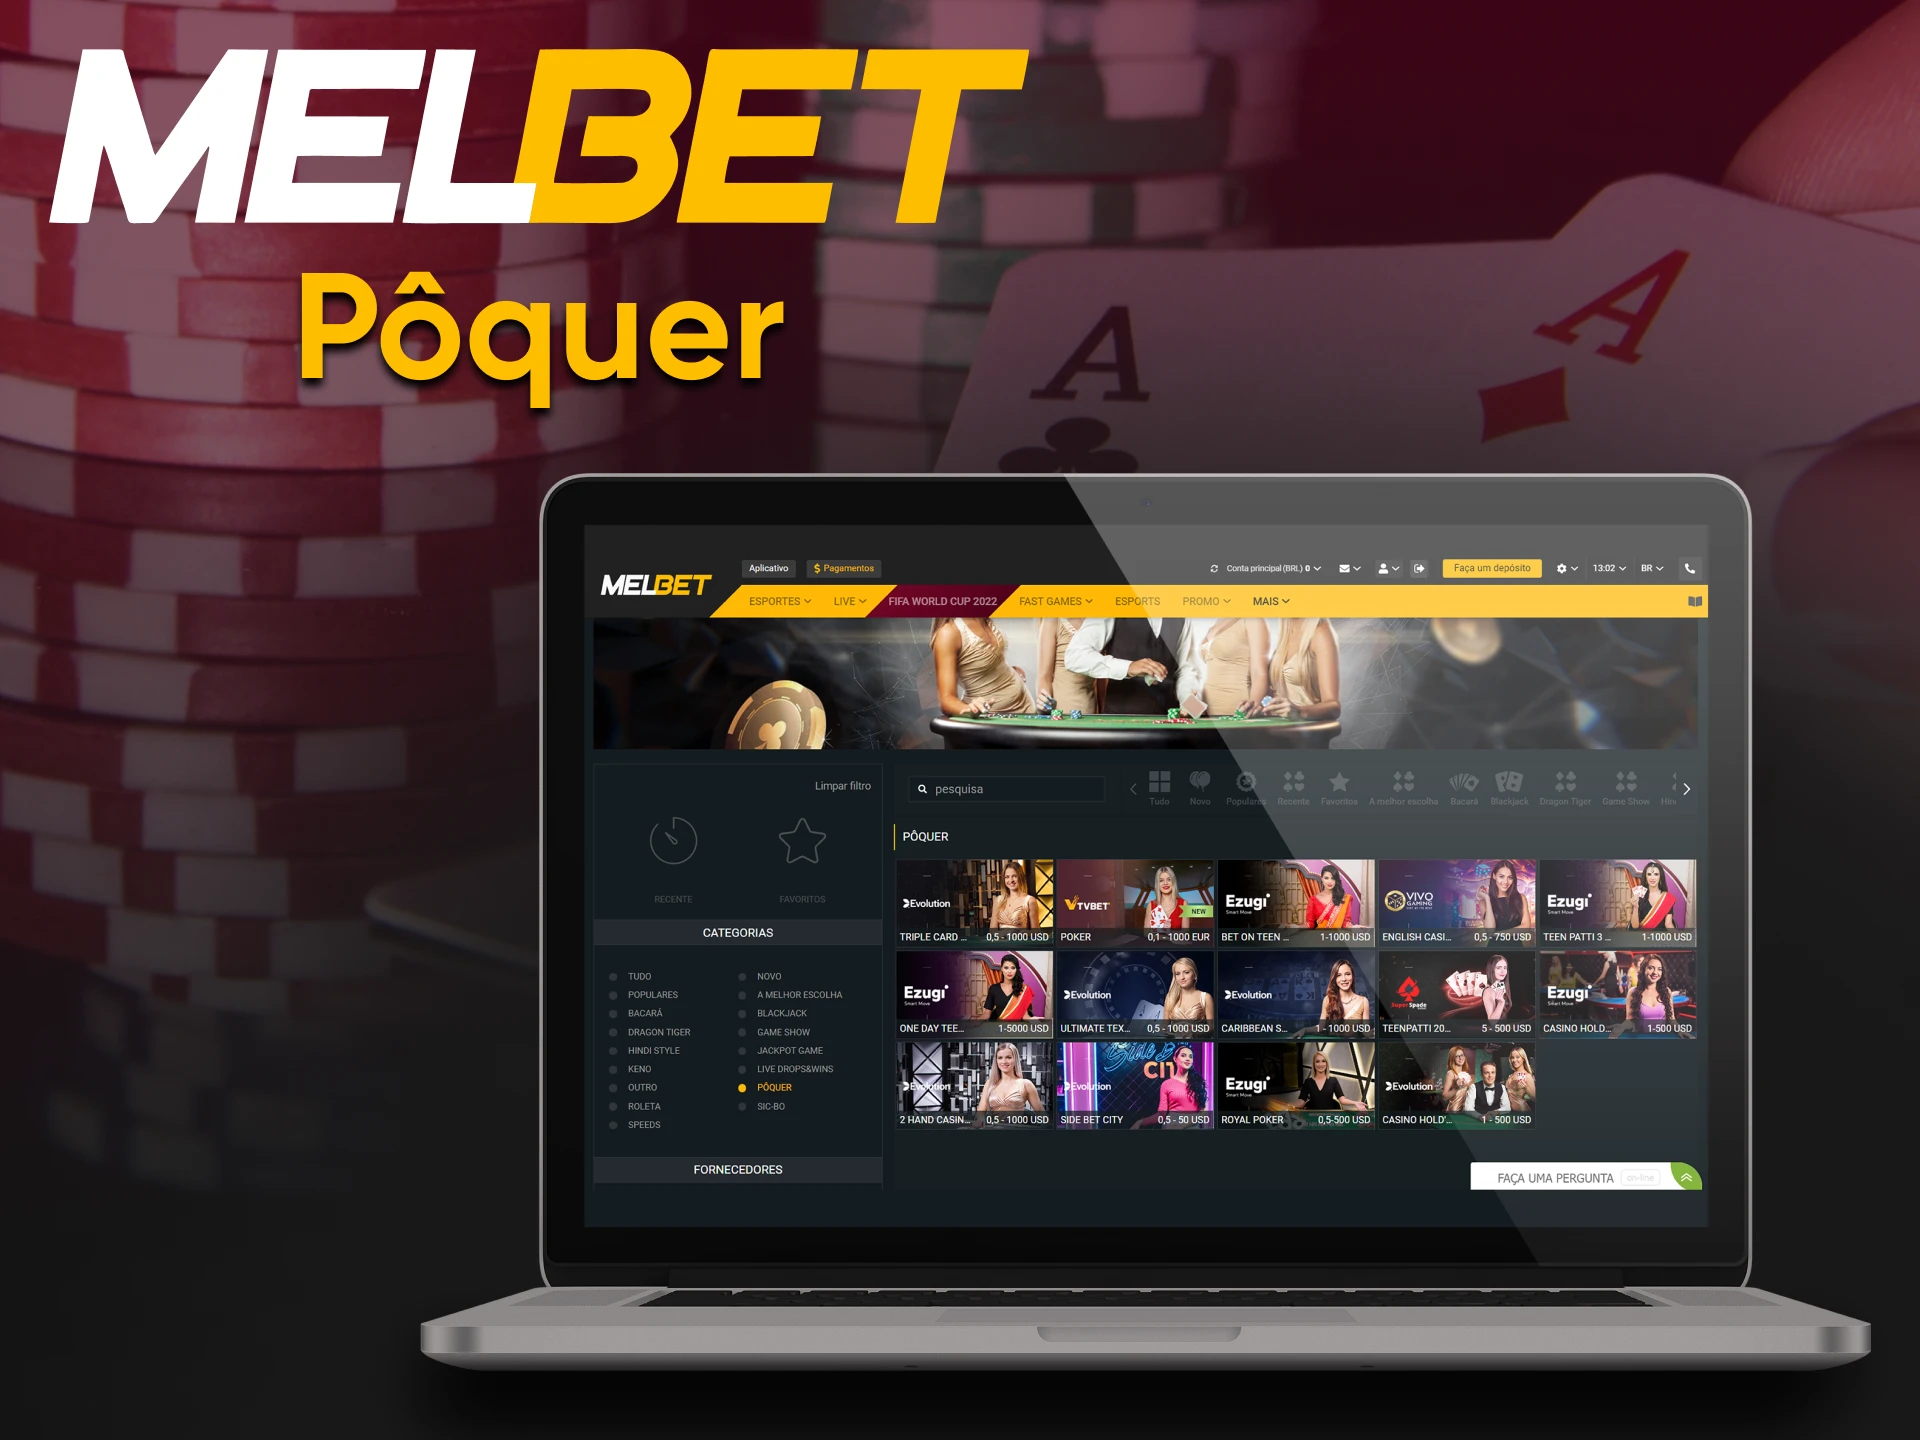 For card game fans, Melbet has poker.